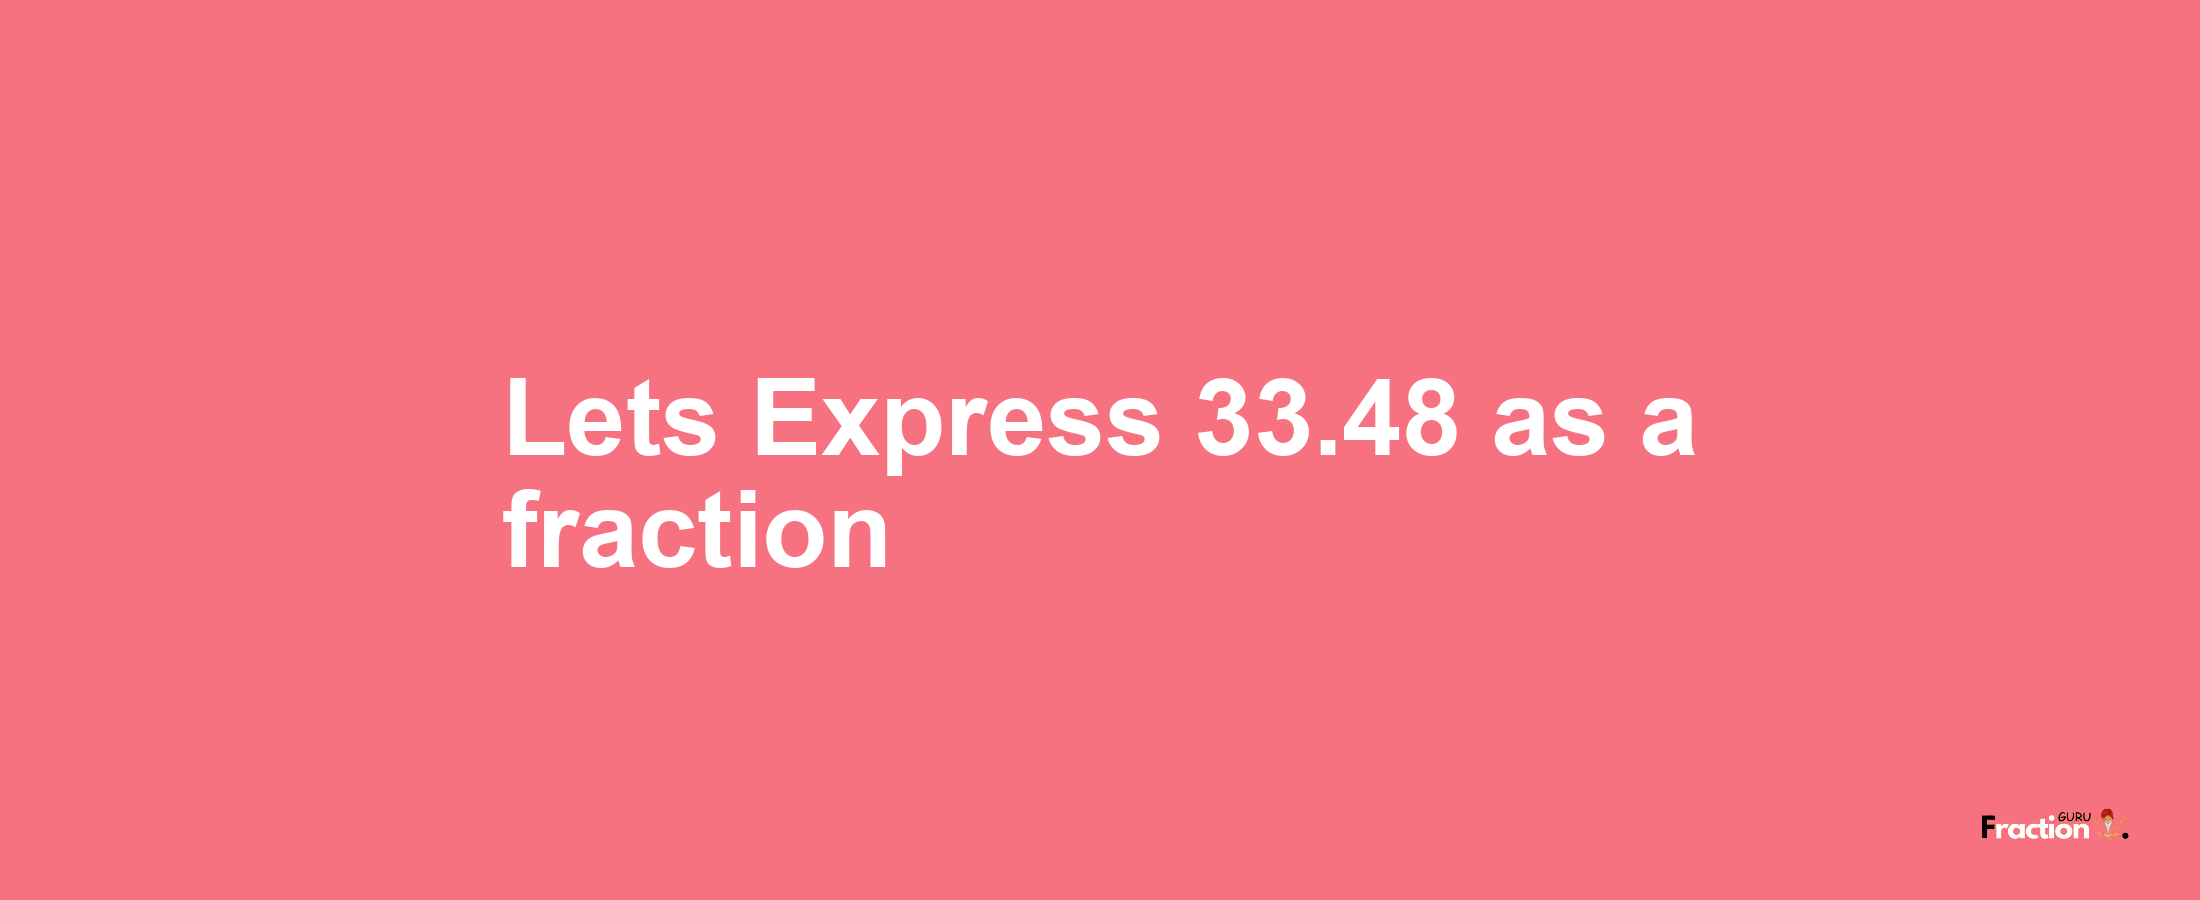 Lets Express 33.48 as afraction